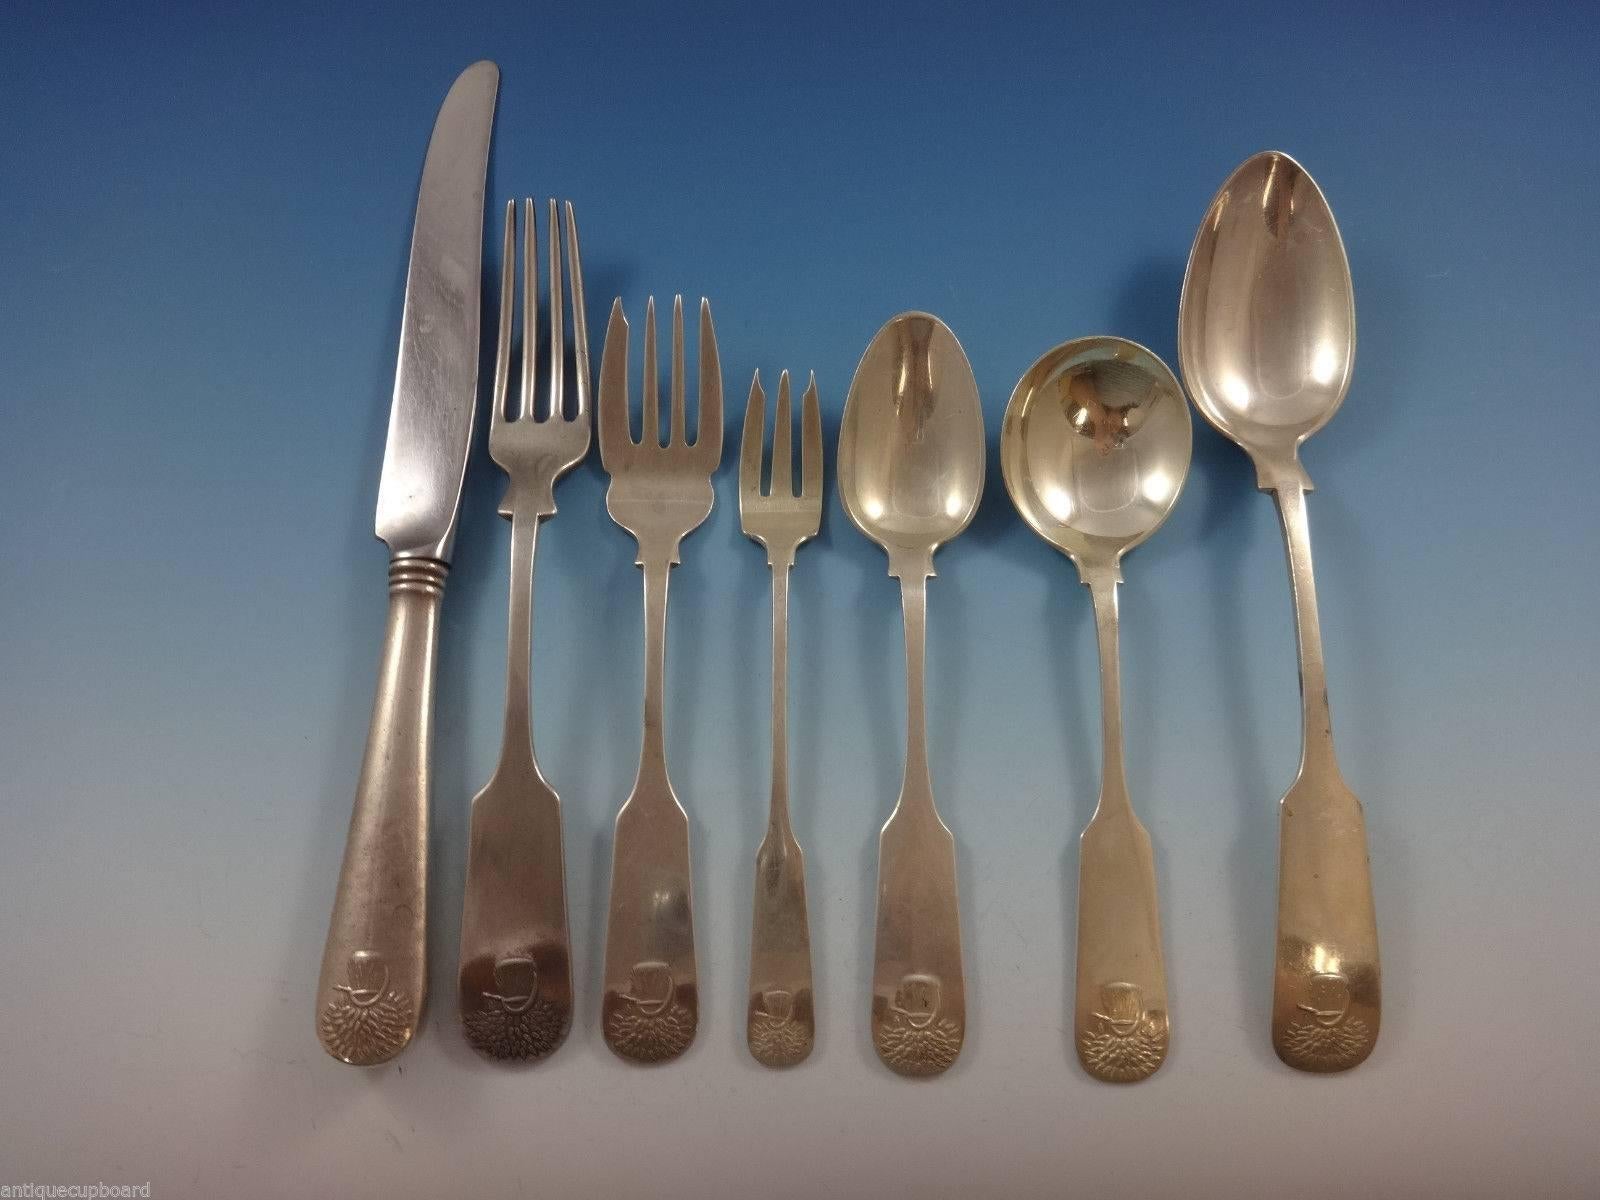 Rare Sheaf of Wheat by Durgin / Gorham sterling silver flatware set of 61 pieces. This set includes:

Eight knives, 8 7/8